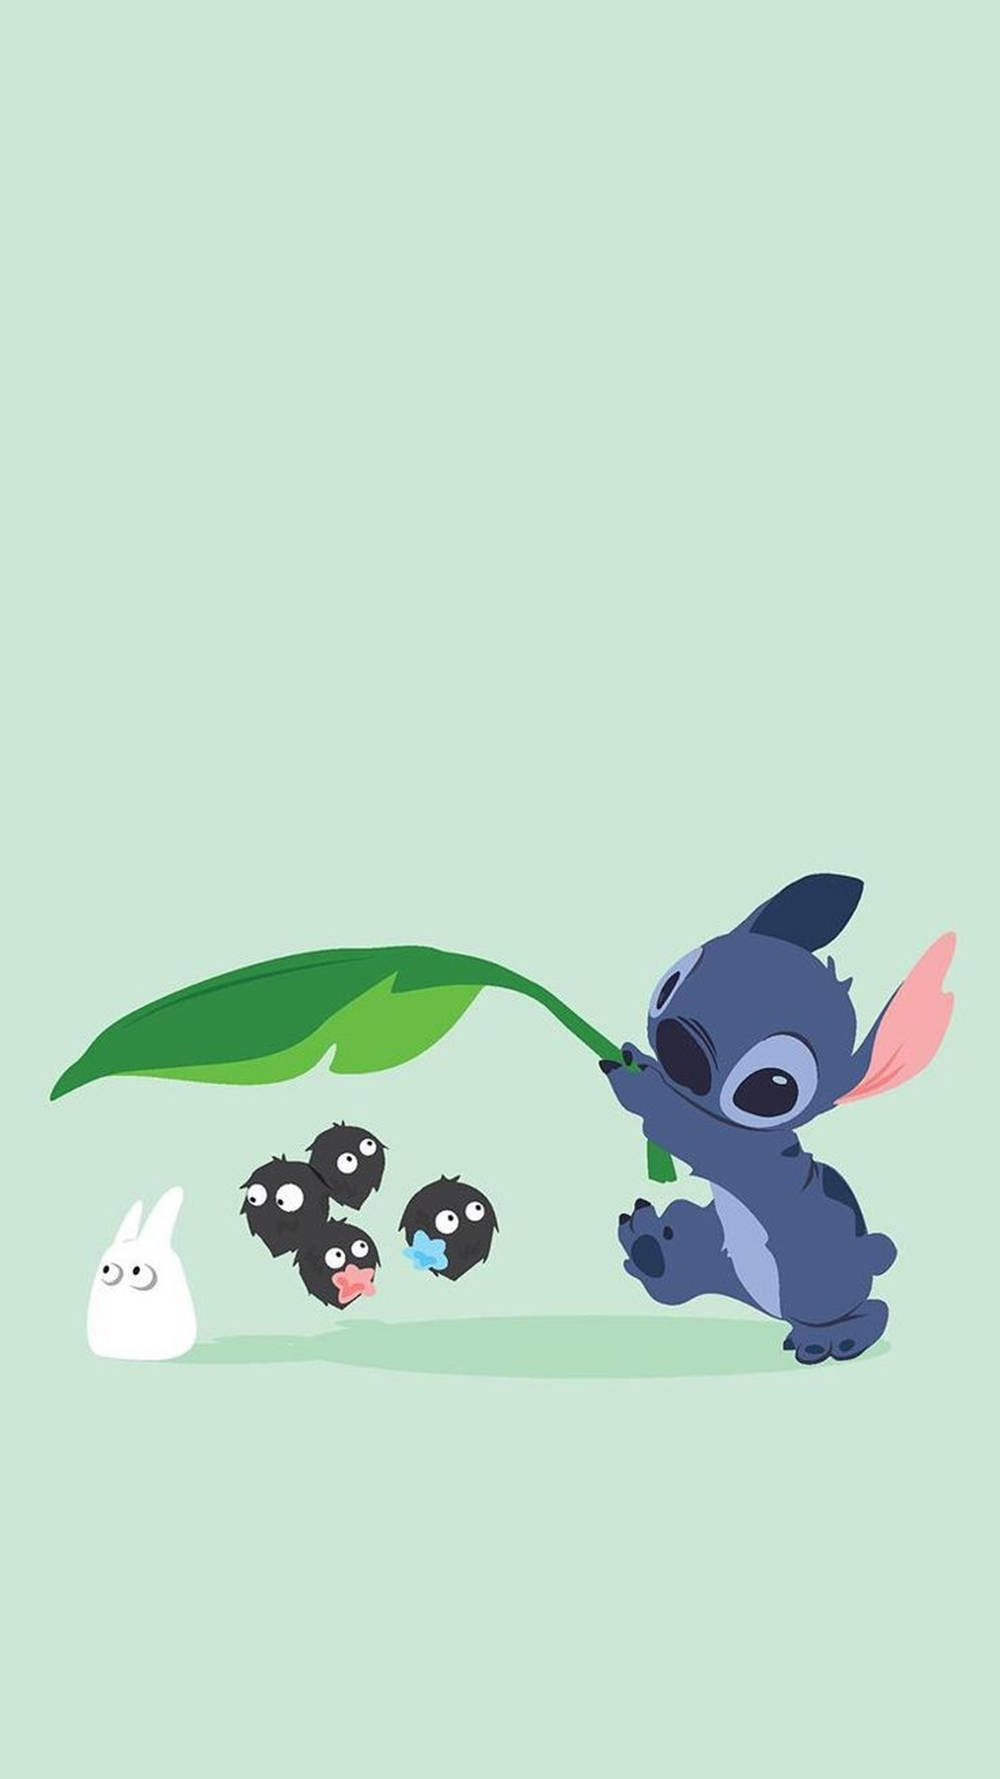 Cute Stitch Coconut And Bunny IPhone Wallpaper